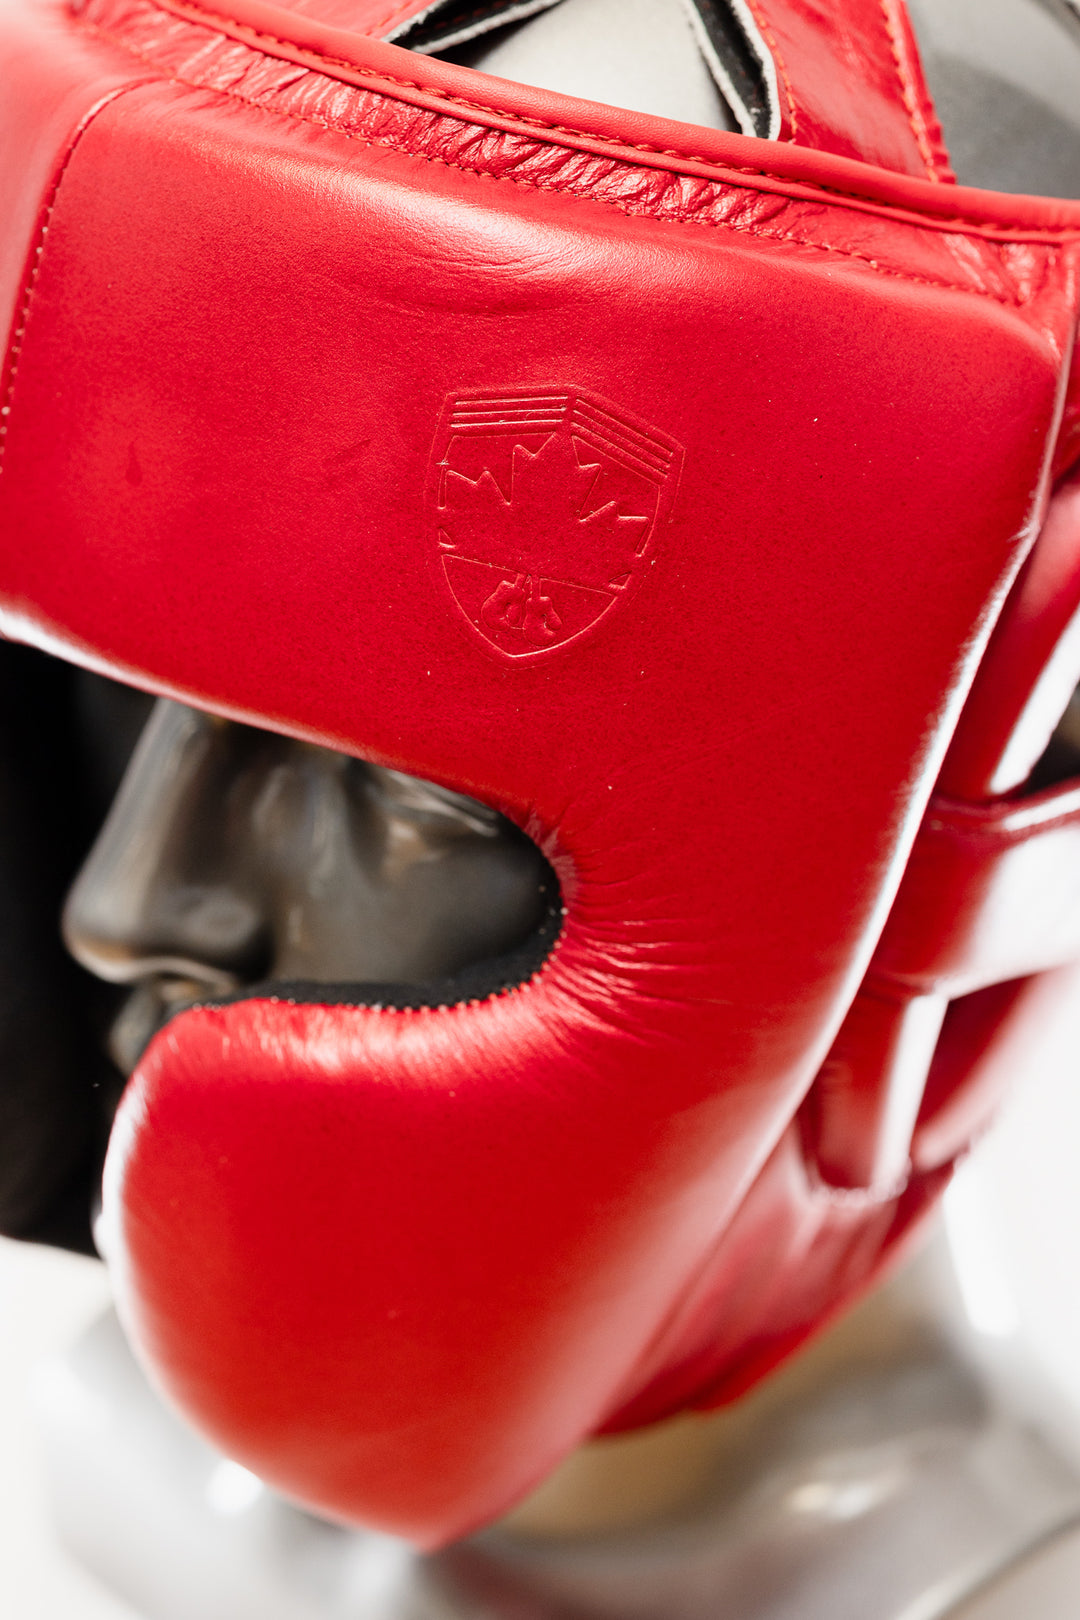 H70 SPARRING HEAD GUARD - CHILI RED